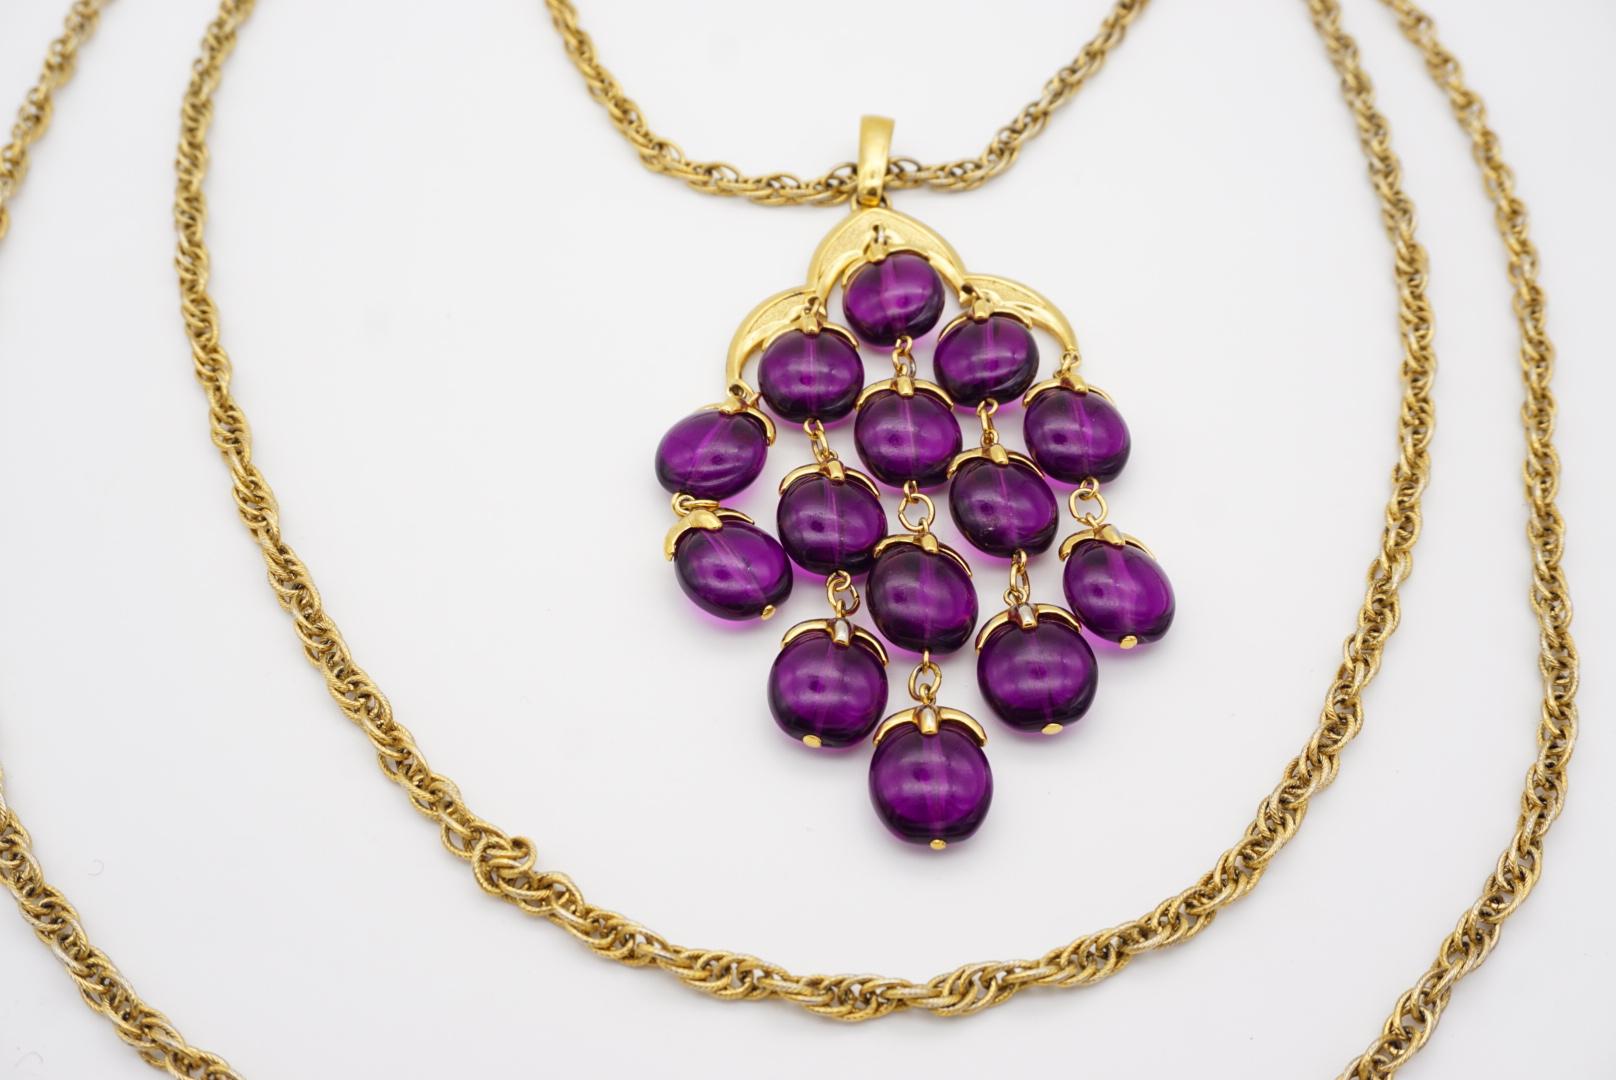 Crown Trifari Vintage 1950s Long Layers Purple Lucite Waterfall Pendant Necklace For Sale 1